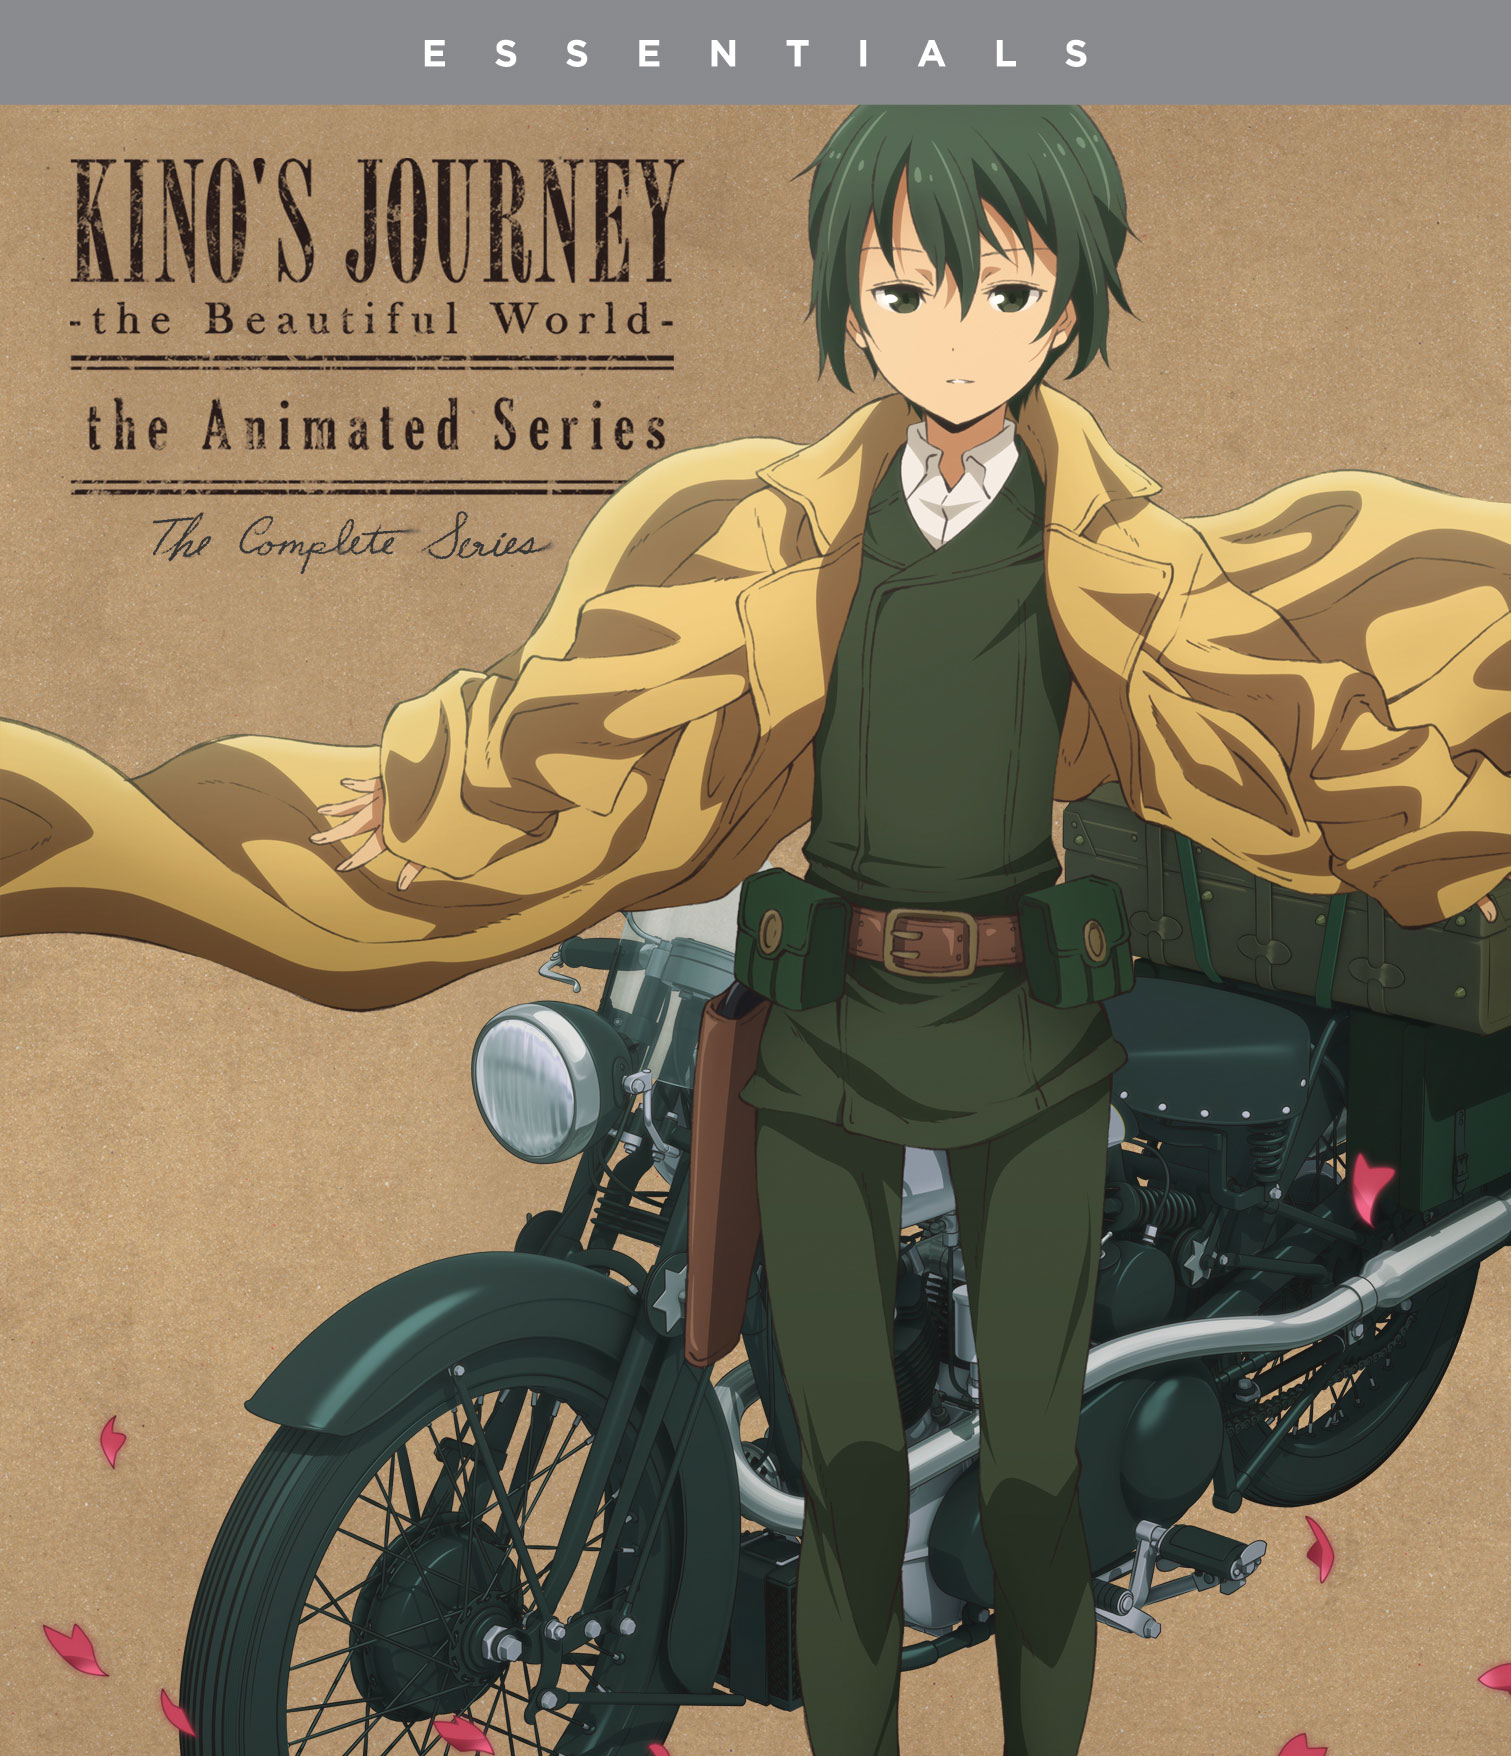 Kino's Journey: The Beautiful World The Complete Animated Series